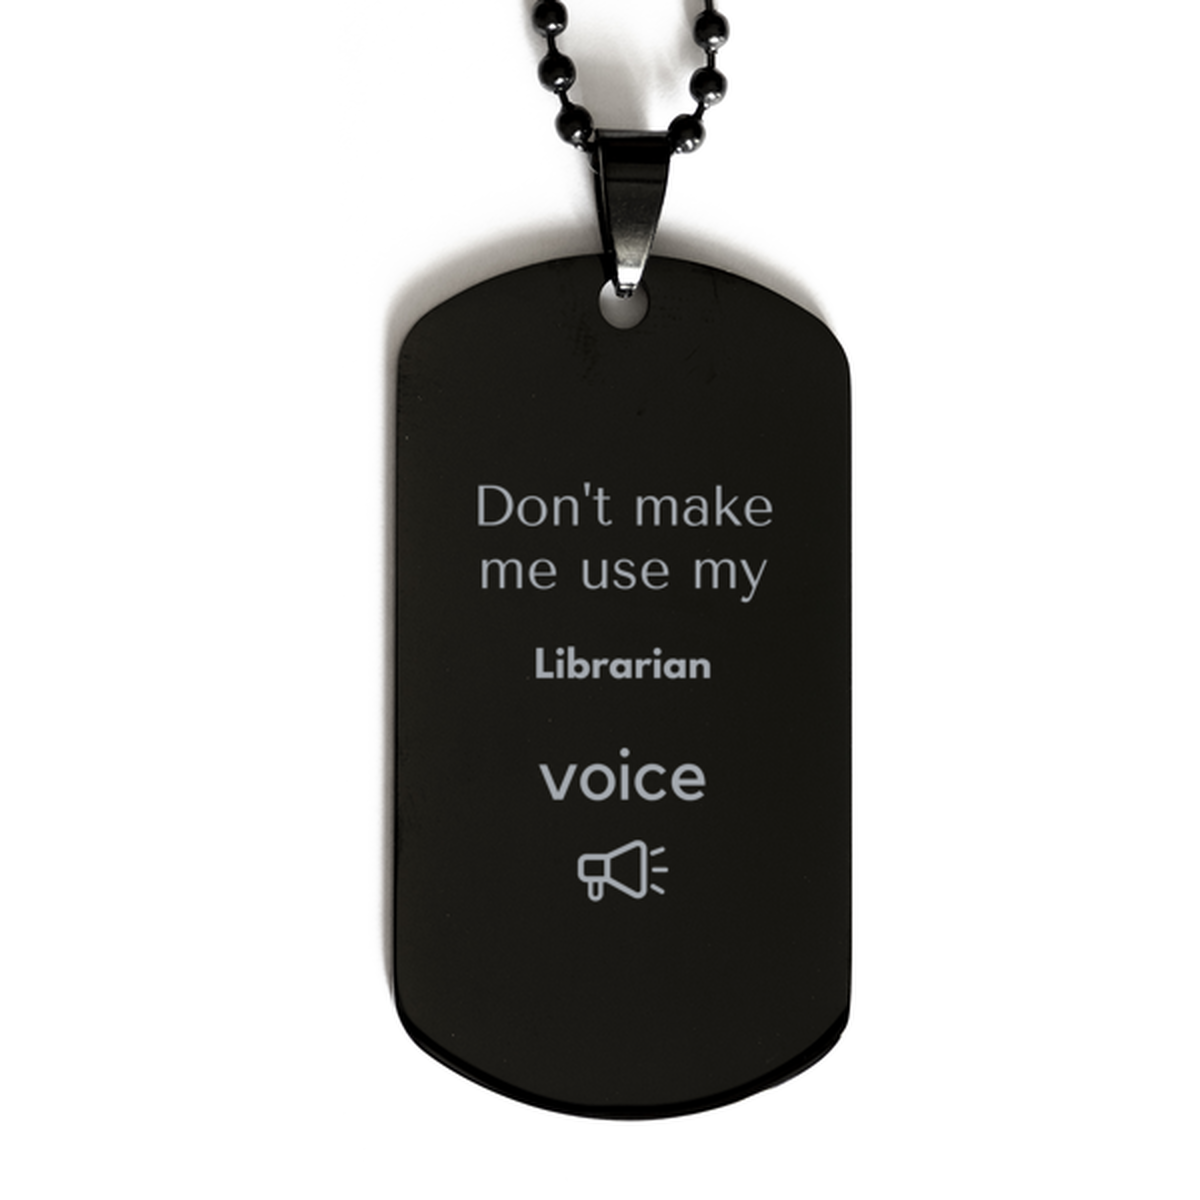 Don't make me use my Librarian voice, Sarcasm Librarian Gifts, Christmas Librarian Black Dog Tag Birthday Unique Gifts For Librarian Coworkers, Men, Women, Colleague, Friends